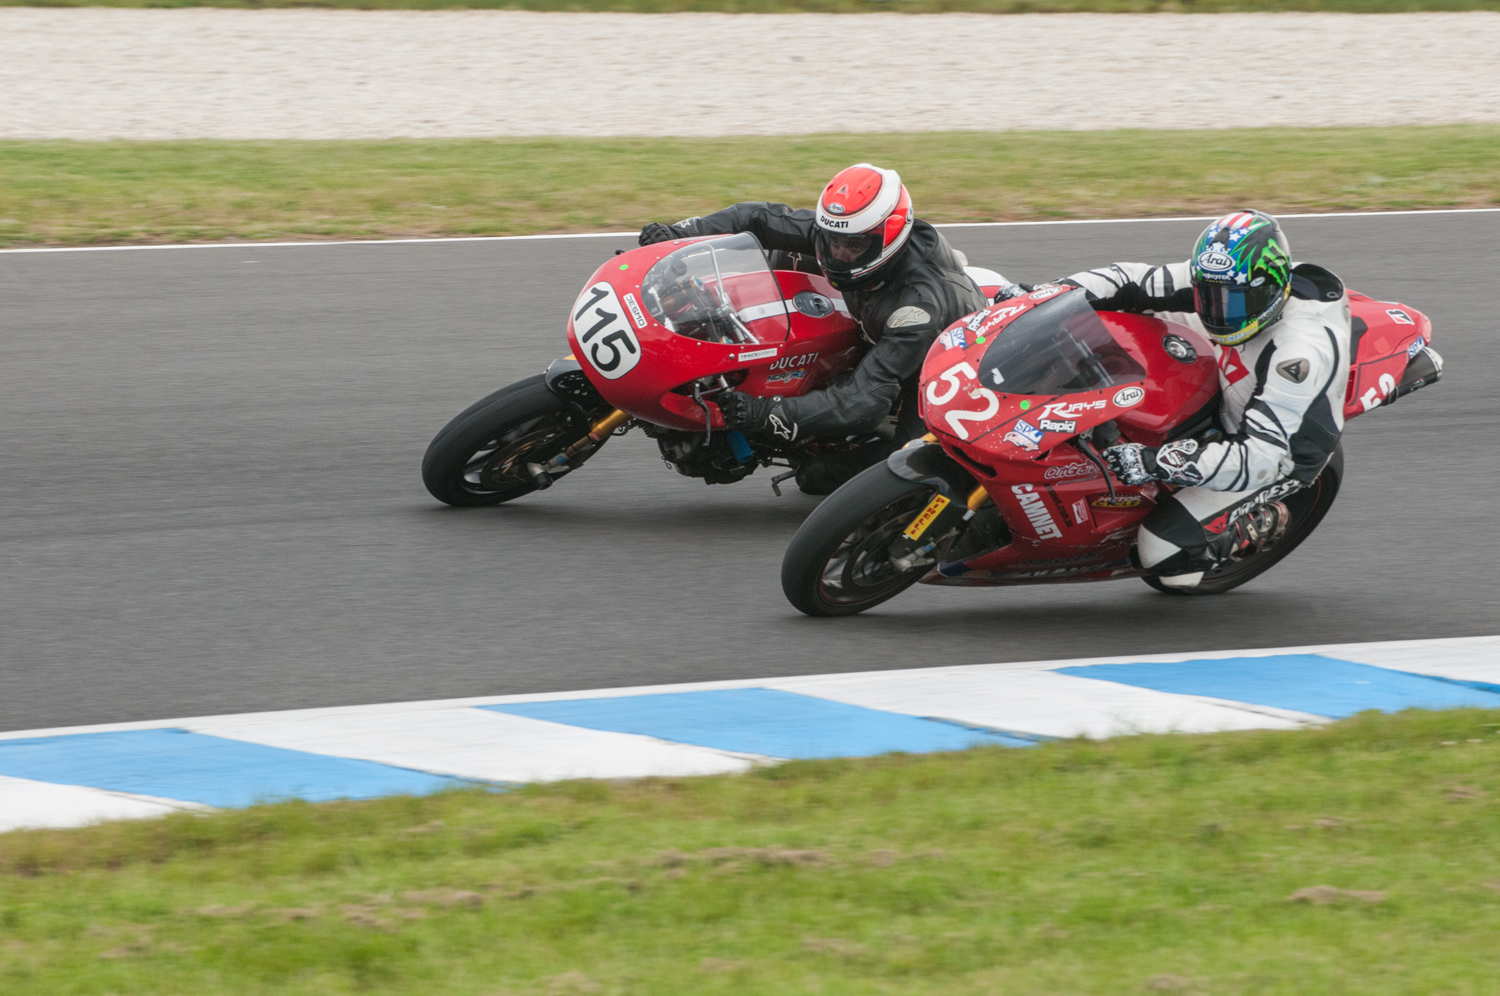 Ducati Owners Club of Victoria celebrate their 40th anniversary motorcycles Phillip Island track day